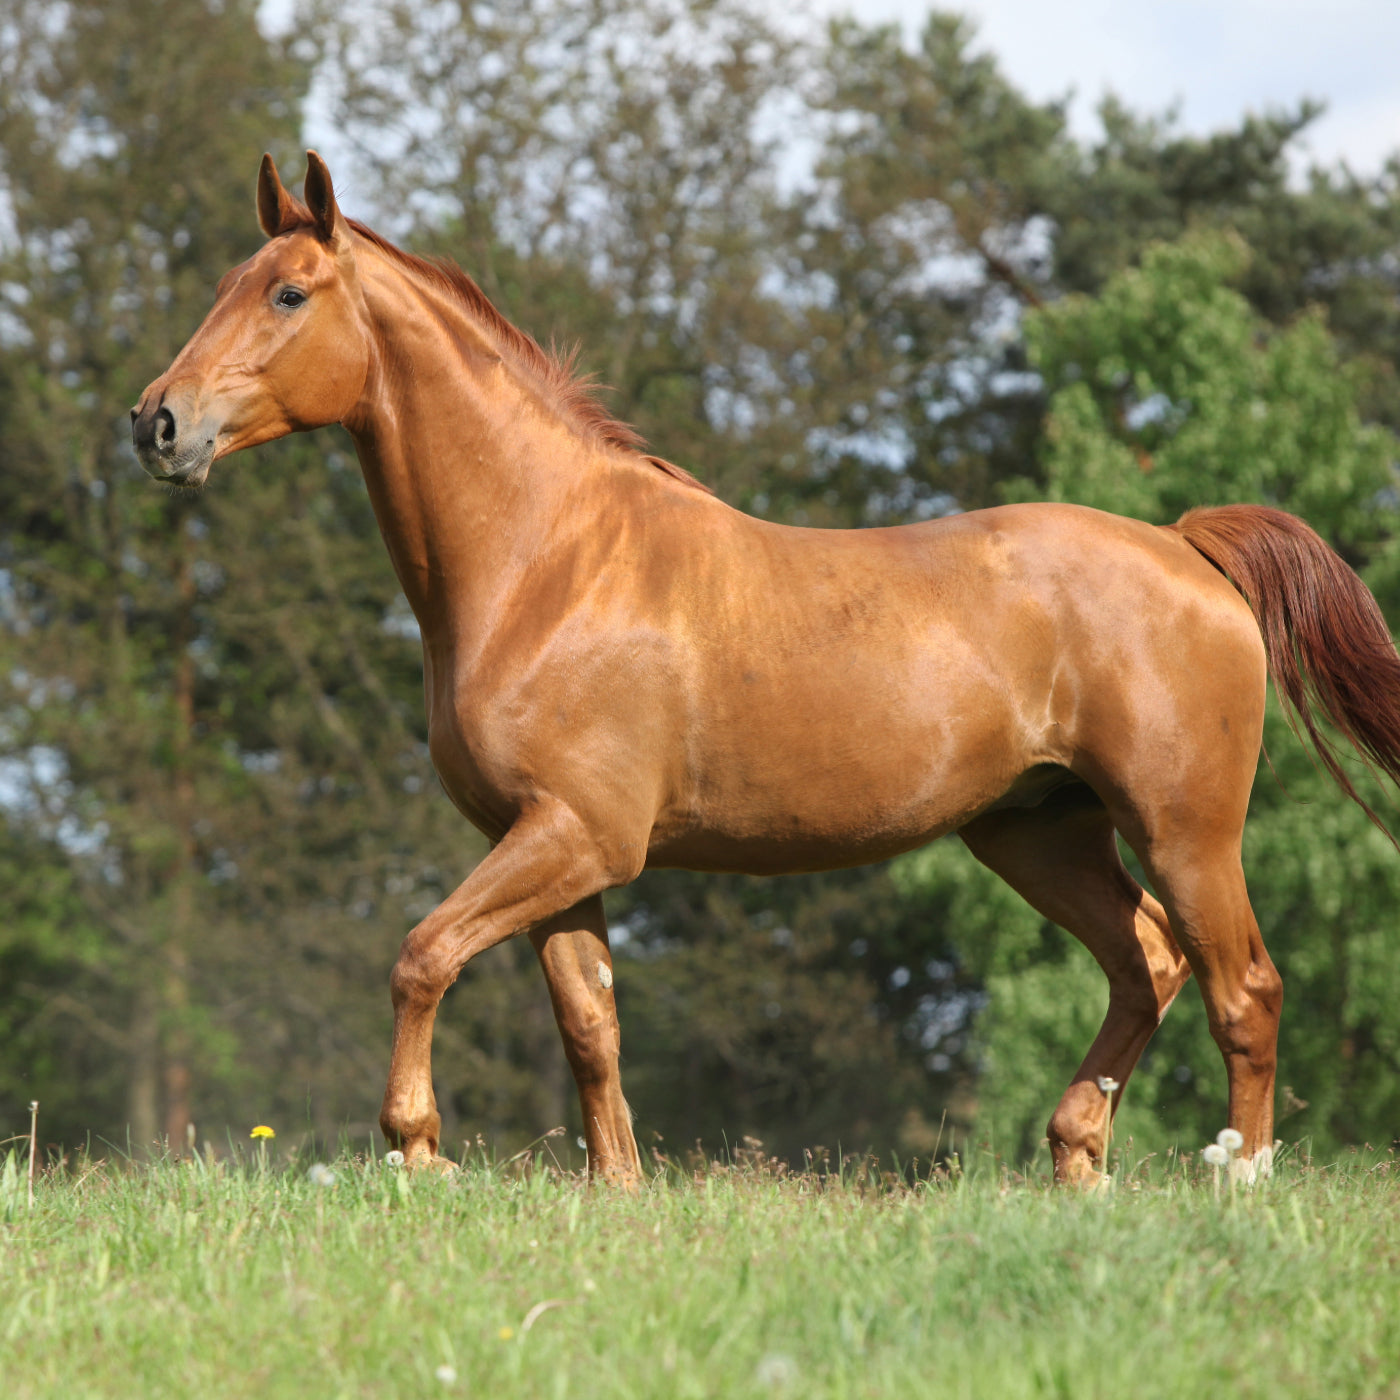 A chestnut horse with a super shiny and healthy coat demonstrating the health benefits of Evolved Remedies Organic Black Cumin Seed Press Cake Supplement for horses